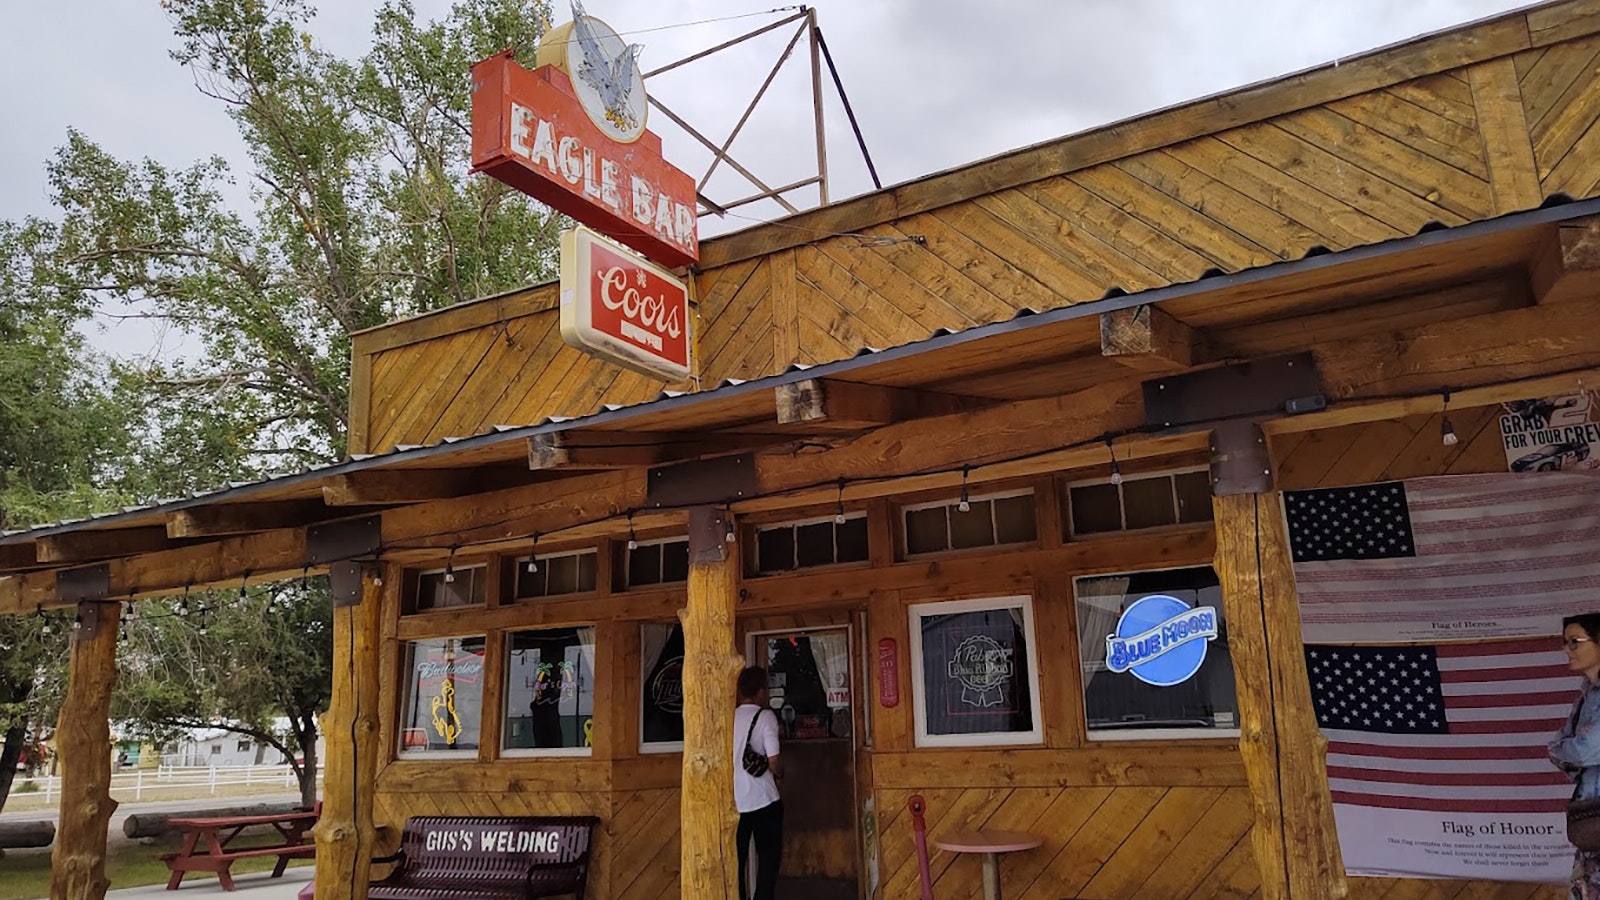 The Eagle Bar in La Barge, Wyoming, celebrates 100 years in business Saturday.